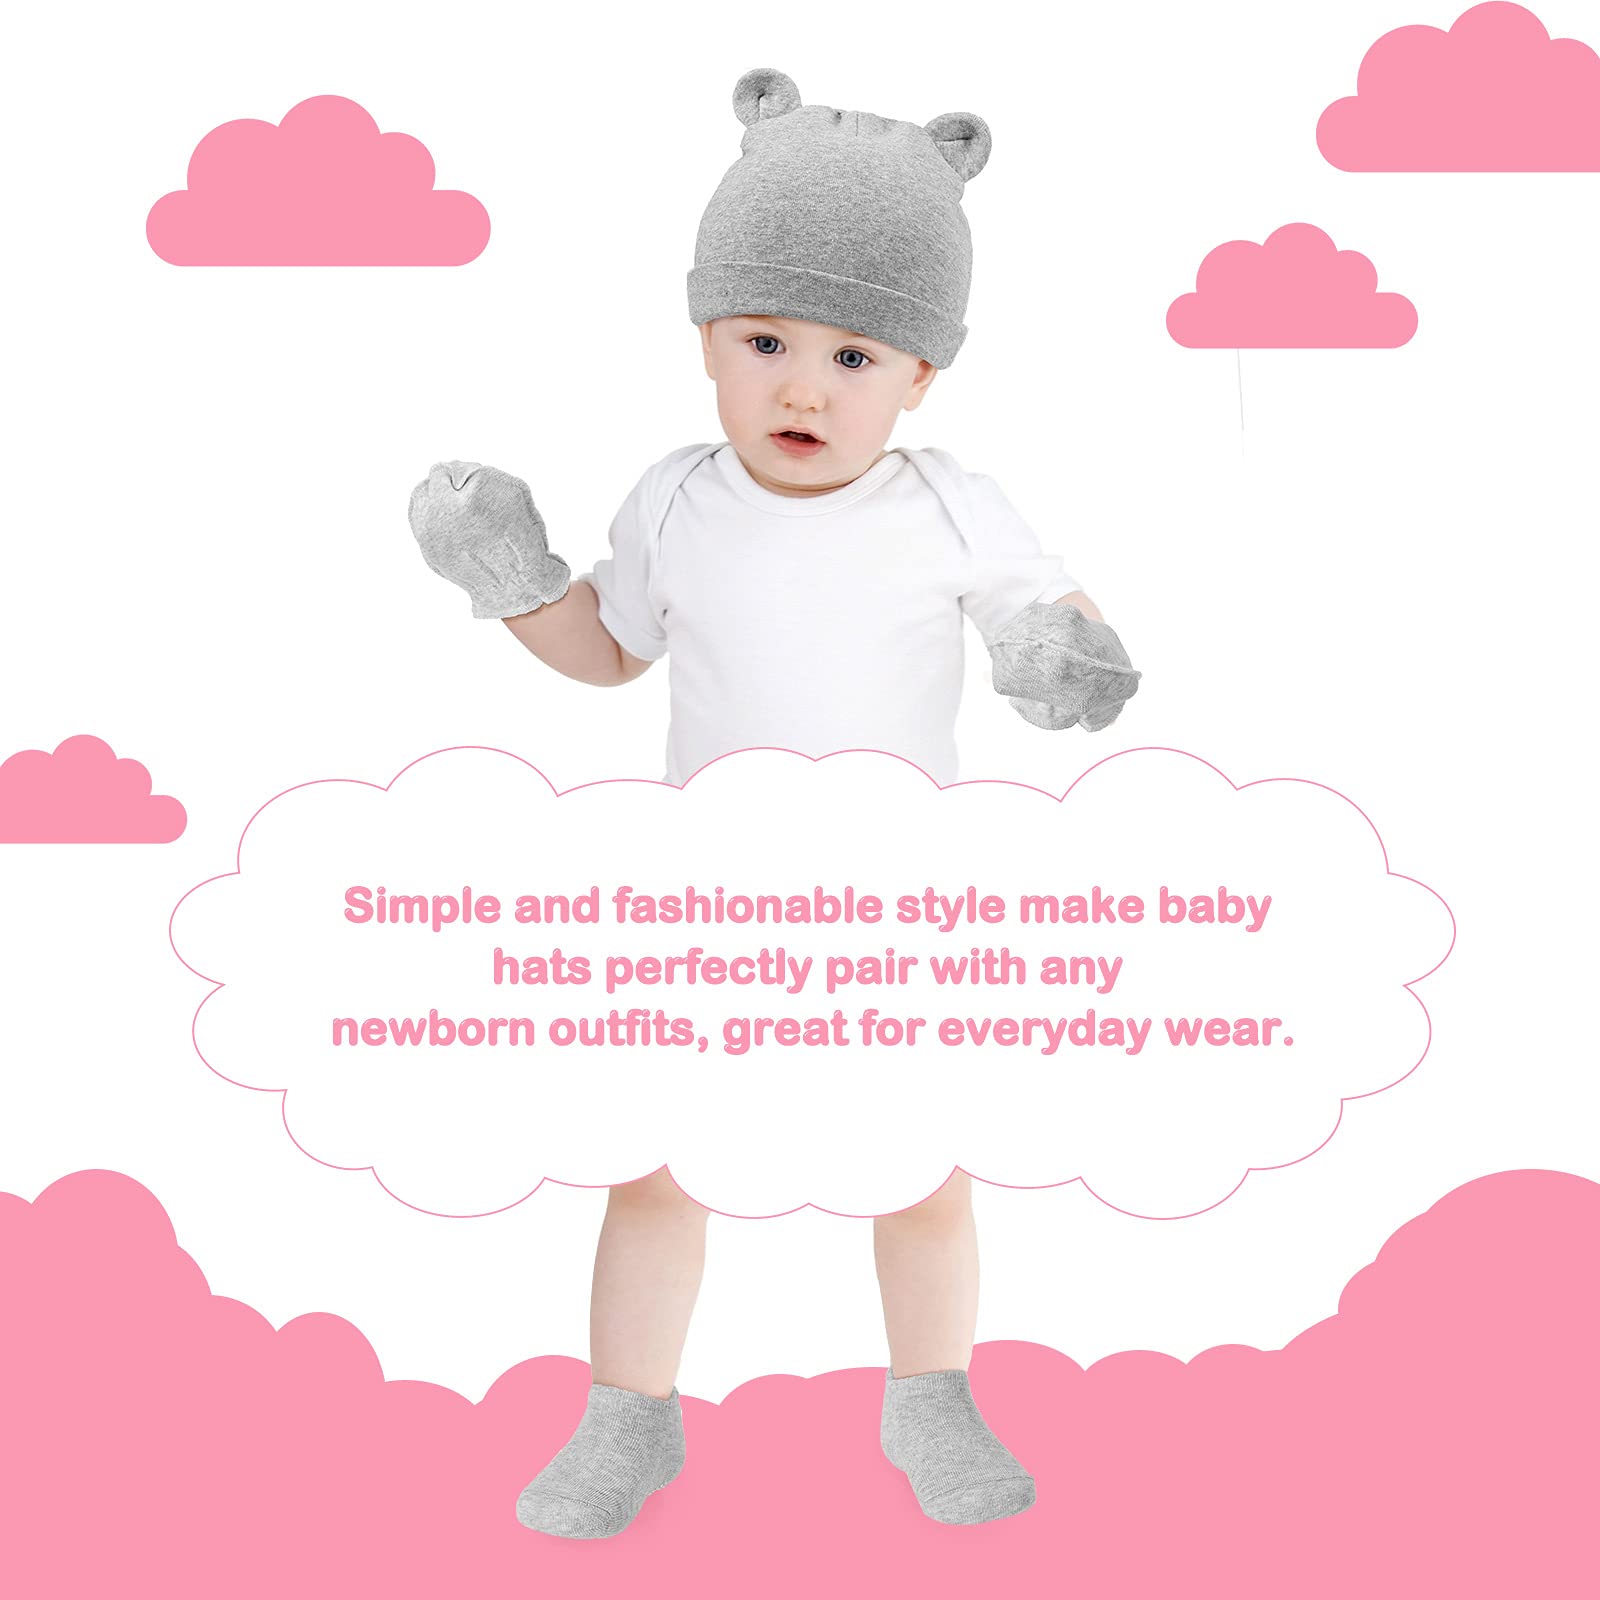 4 Sets Newborn Baby Hat and Mittens Toddler Beanie Cap Non Slip Socks for 0-6 Months (White, Gray, Pink, Purple)